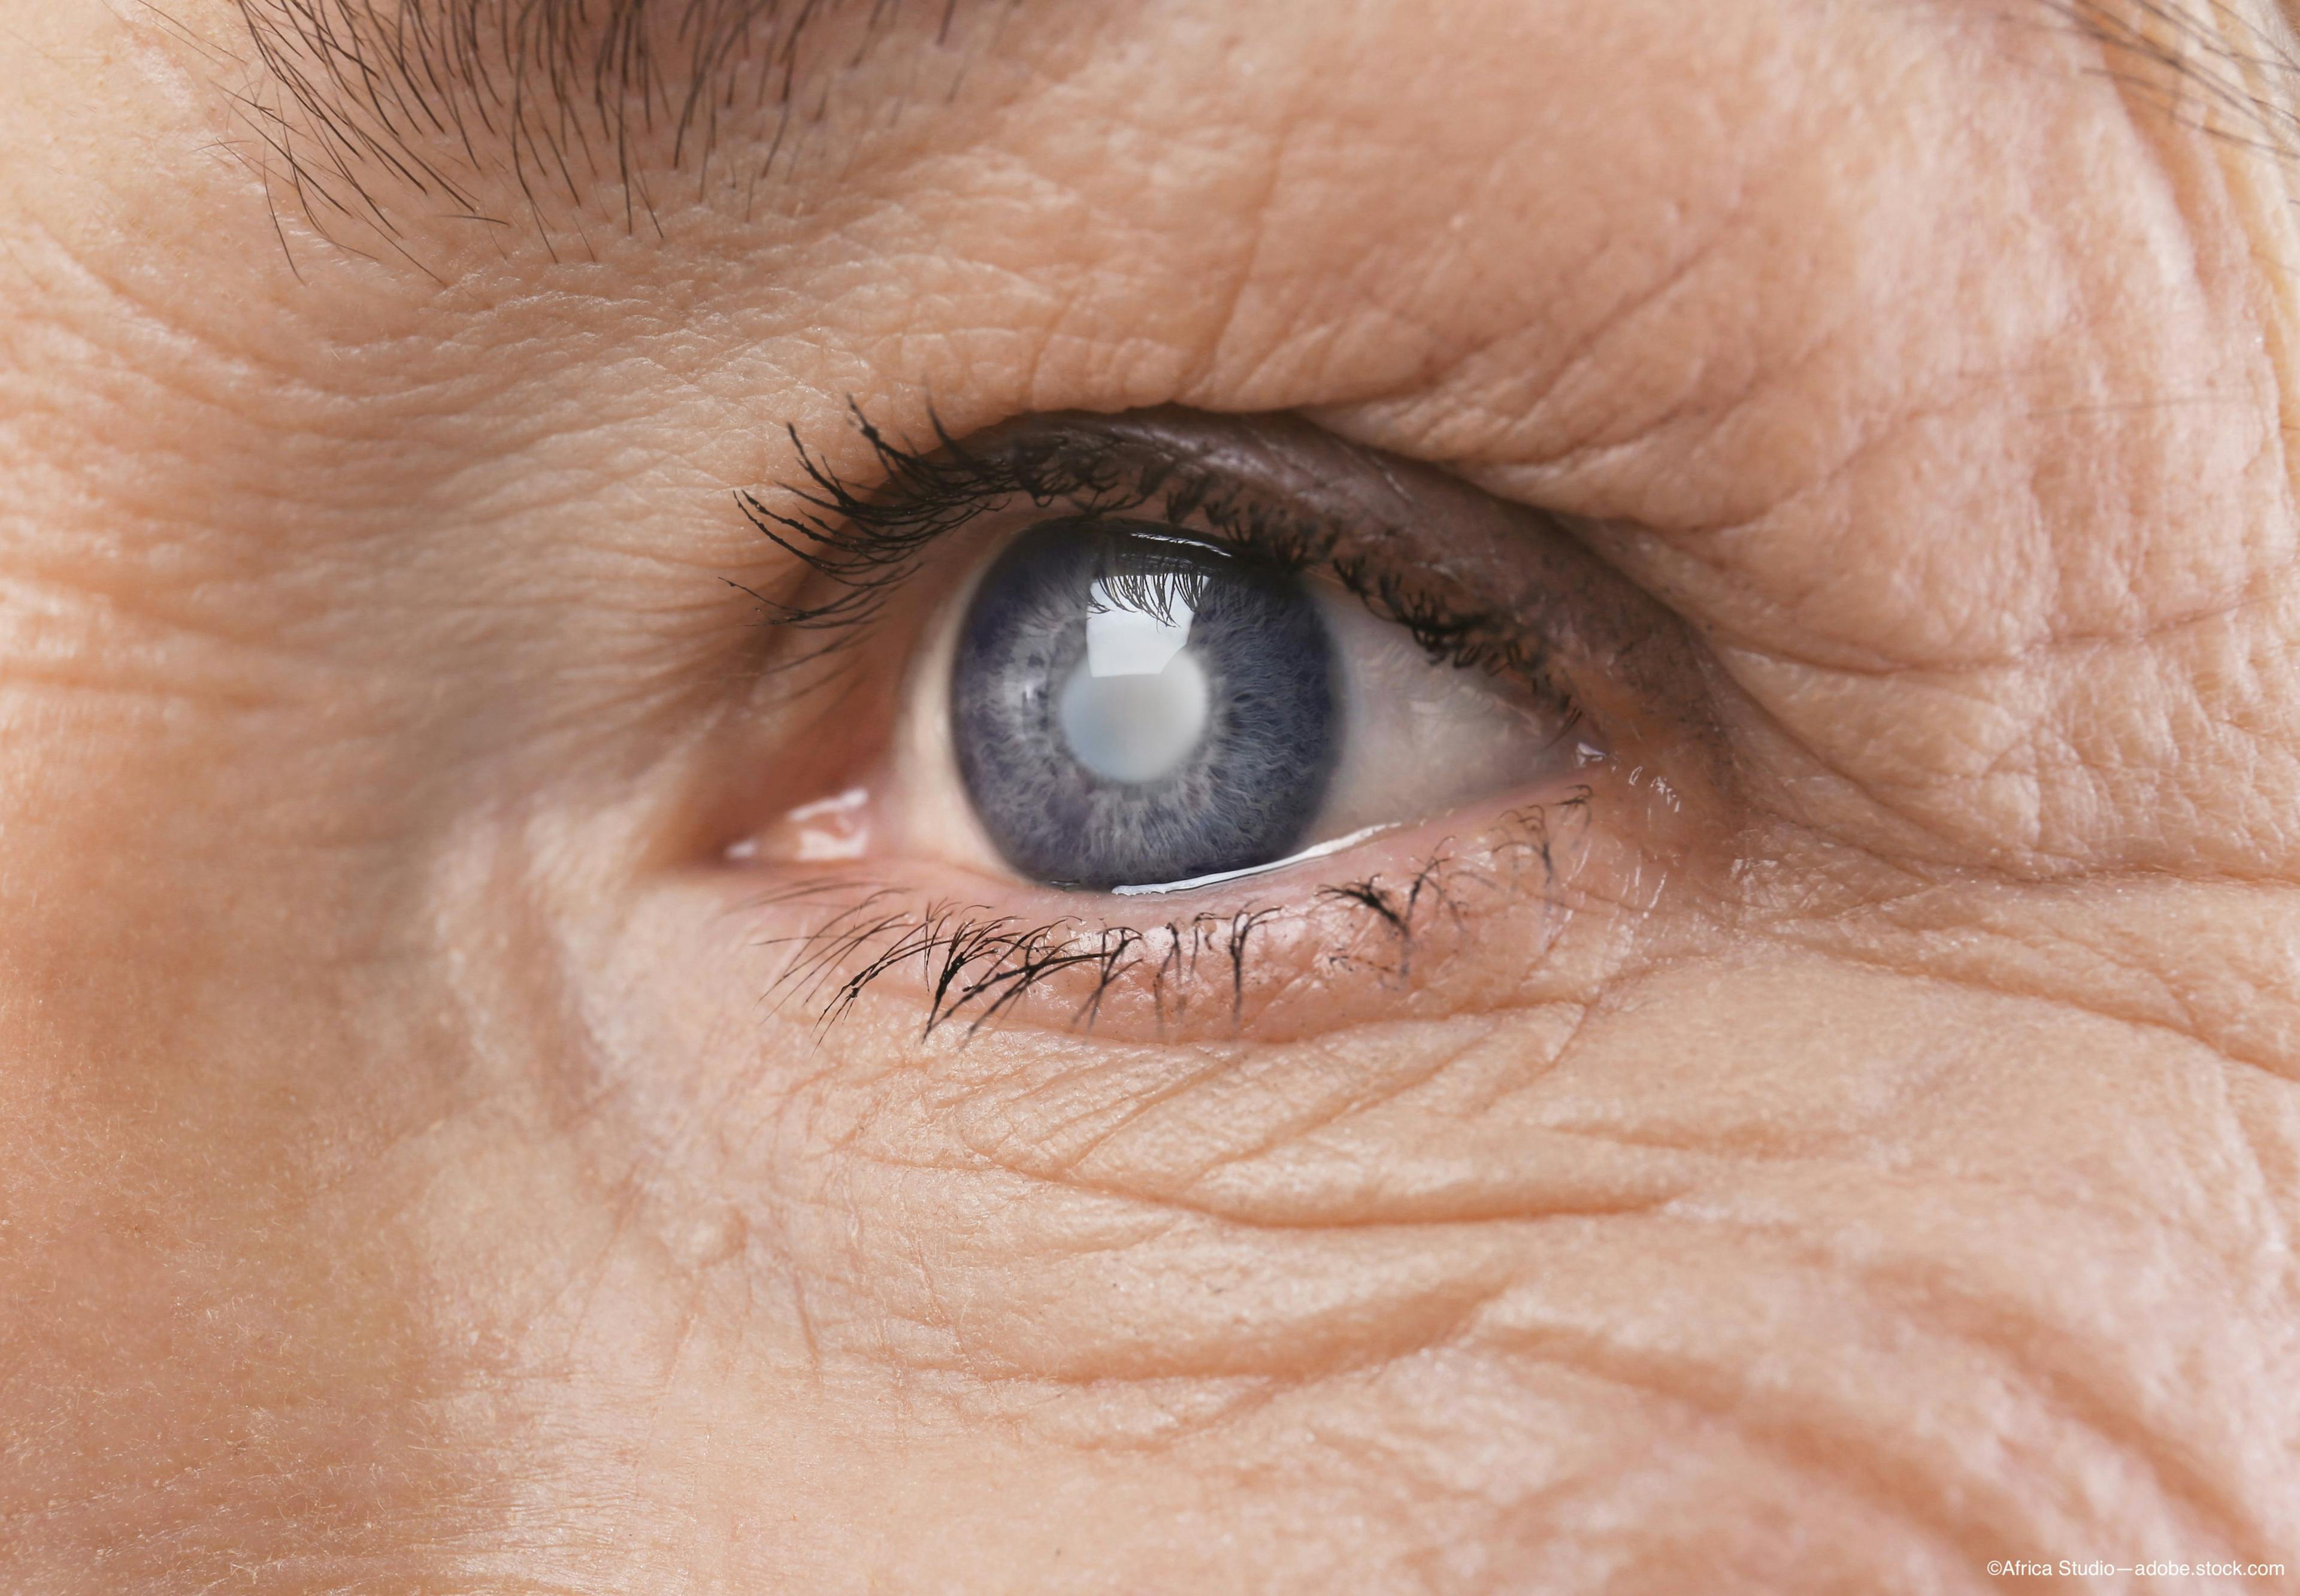 Using pivotal study data to guide glaucoma patient management decisions